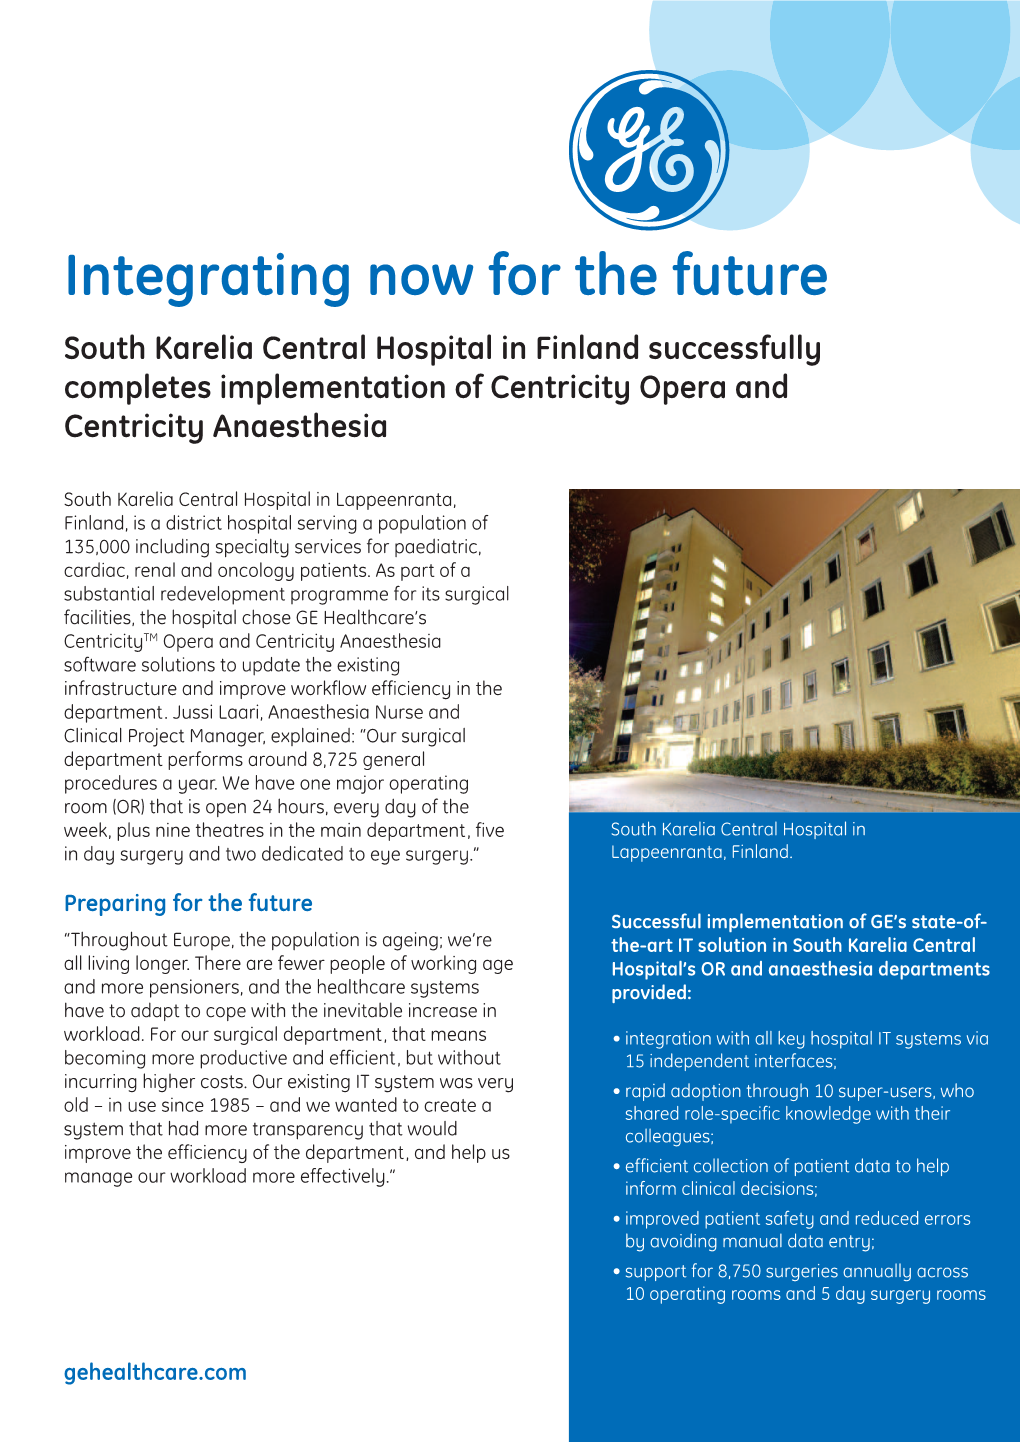 Integrating Now for the Future South Karelia Central Hospital in Finland Successfully Completes Implementation of Centricity Opera and Centricity Anaesthesia